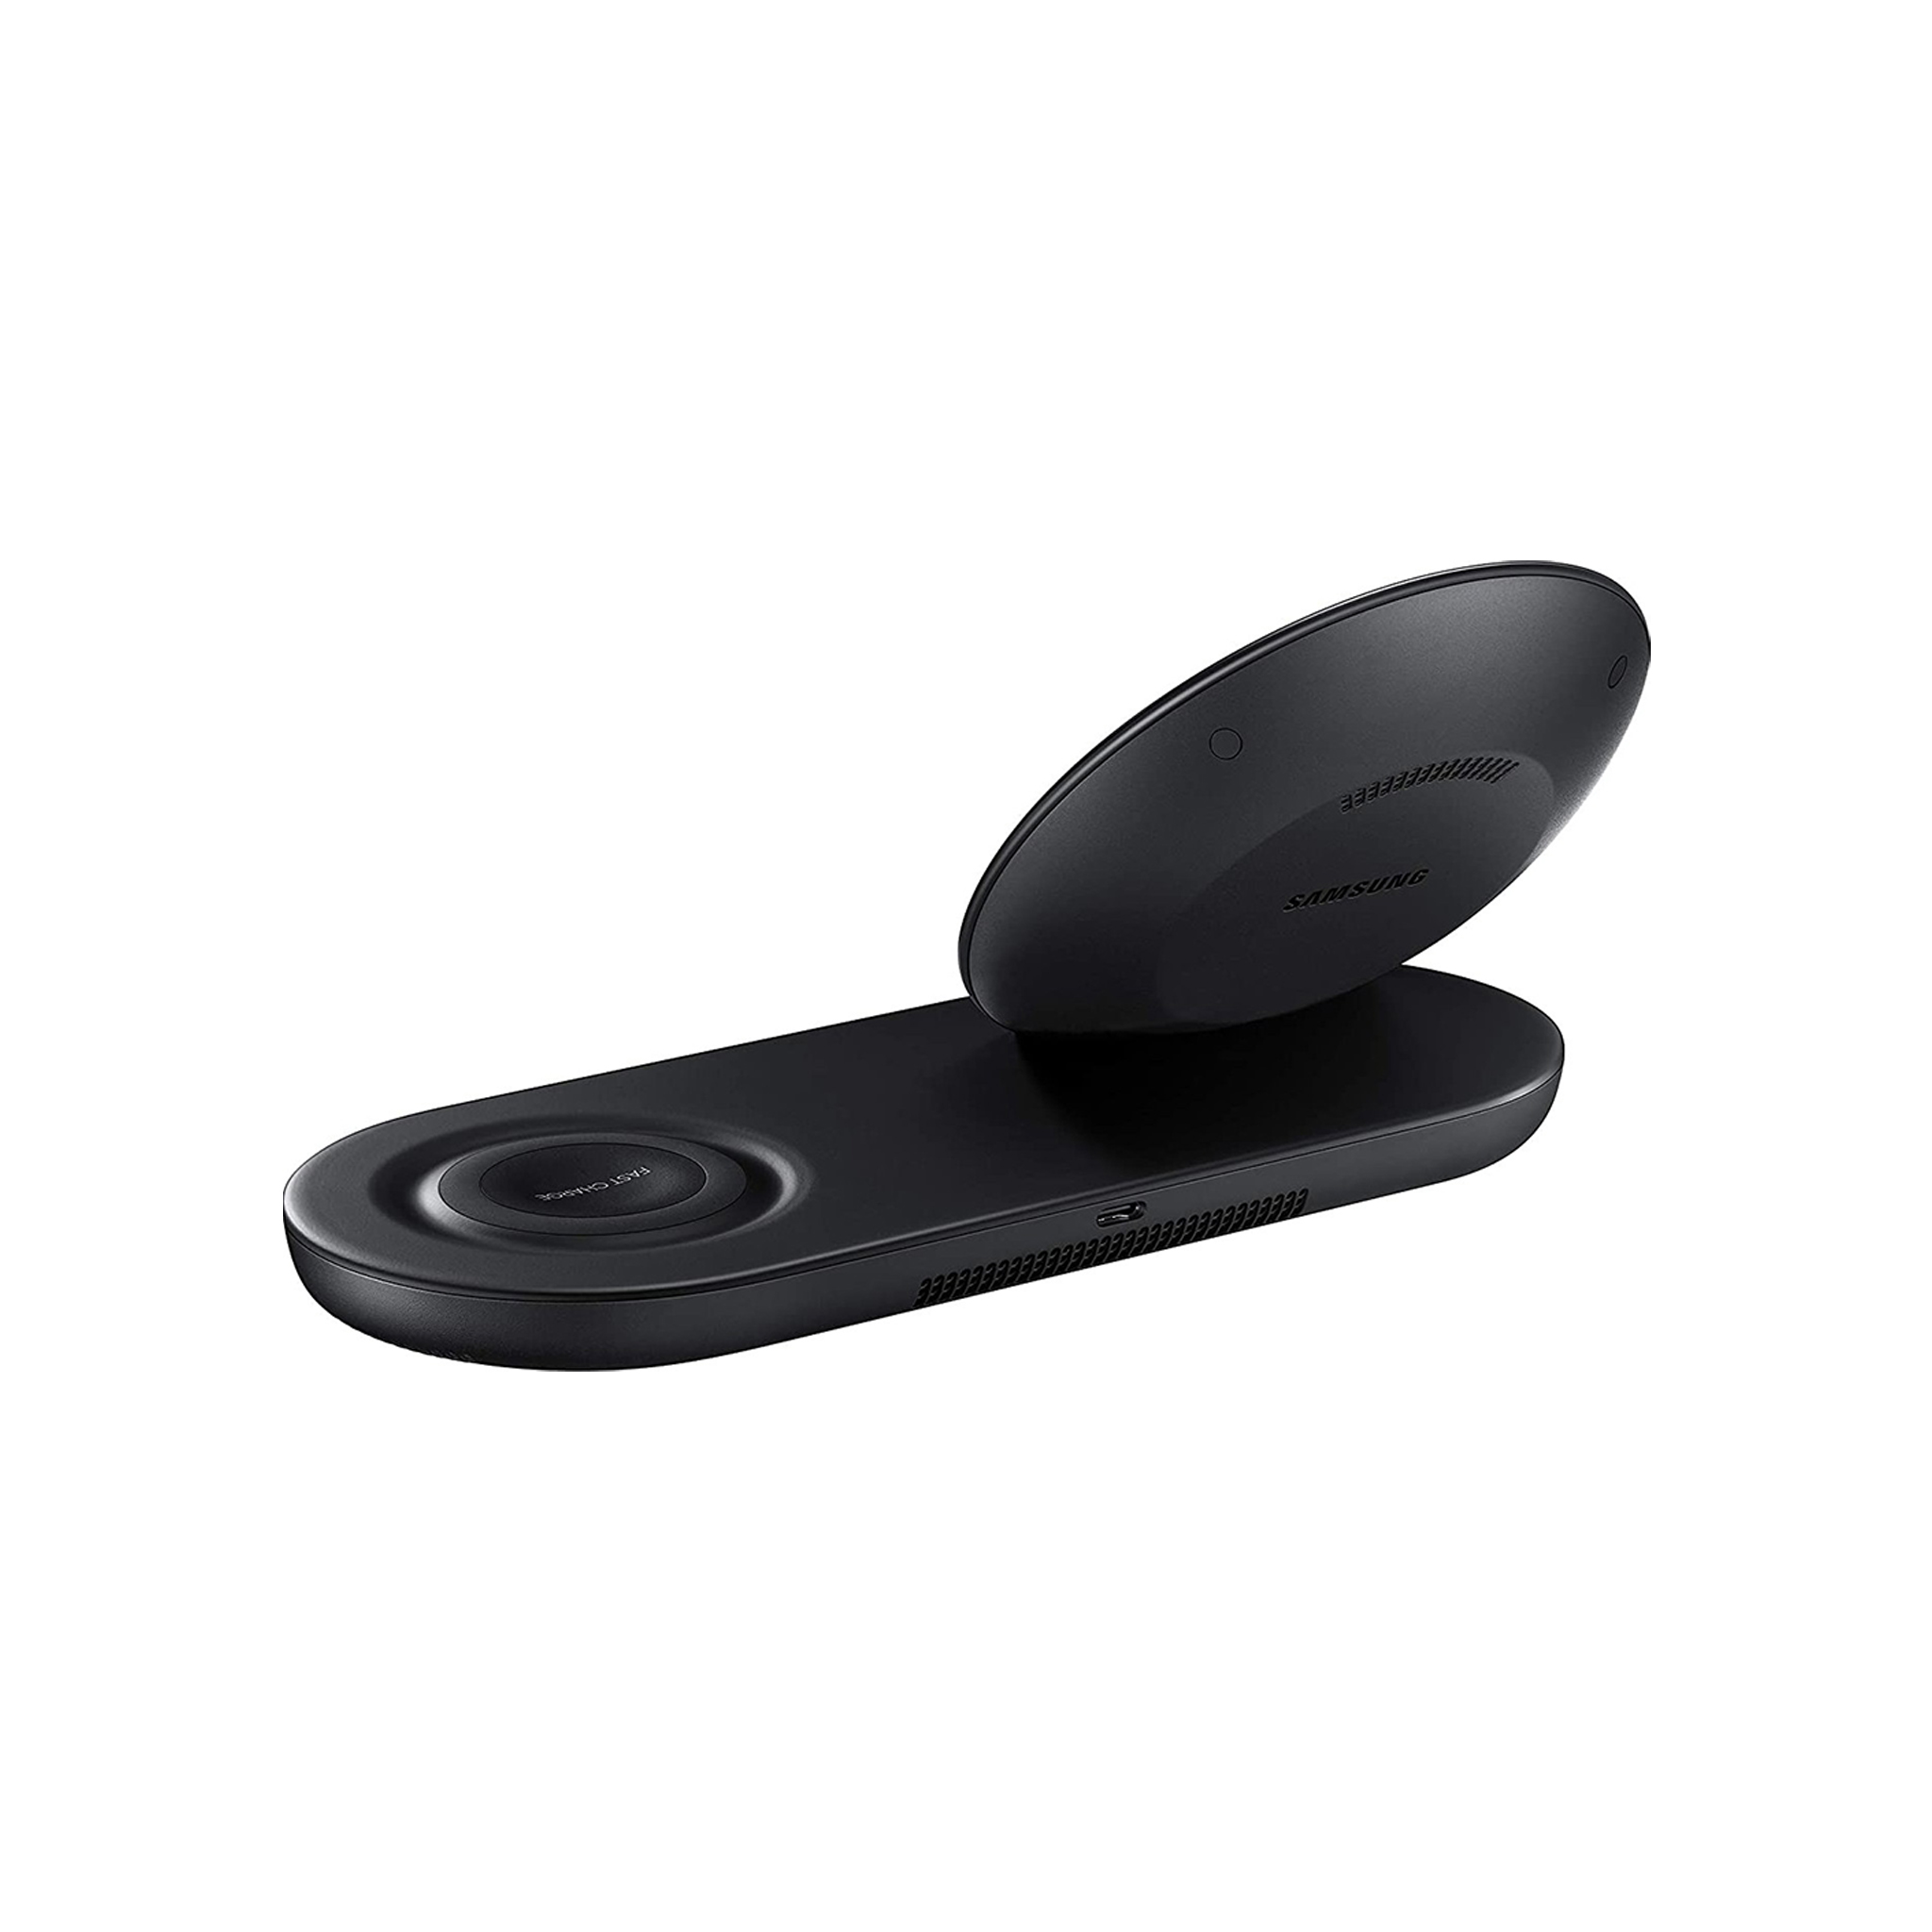 Samsung Wireless Charger Duo Black - 1Sell